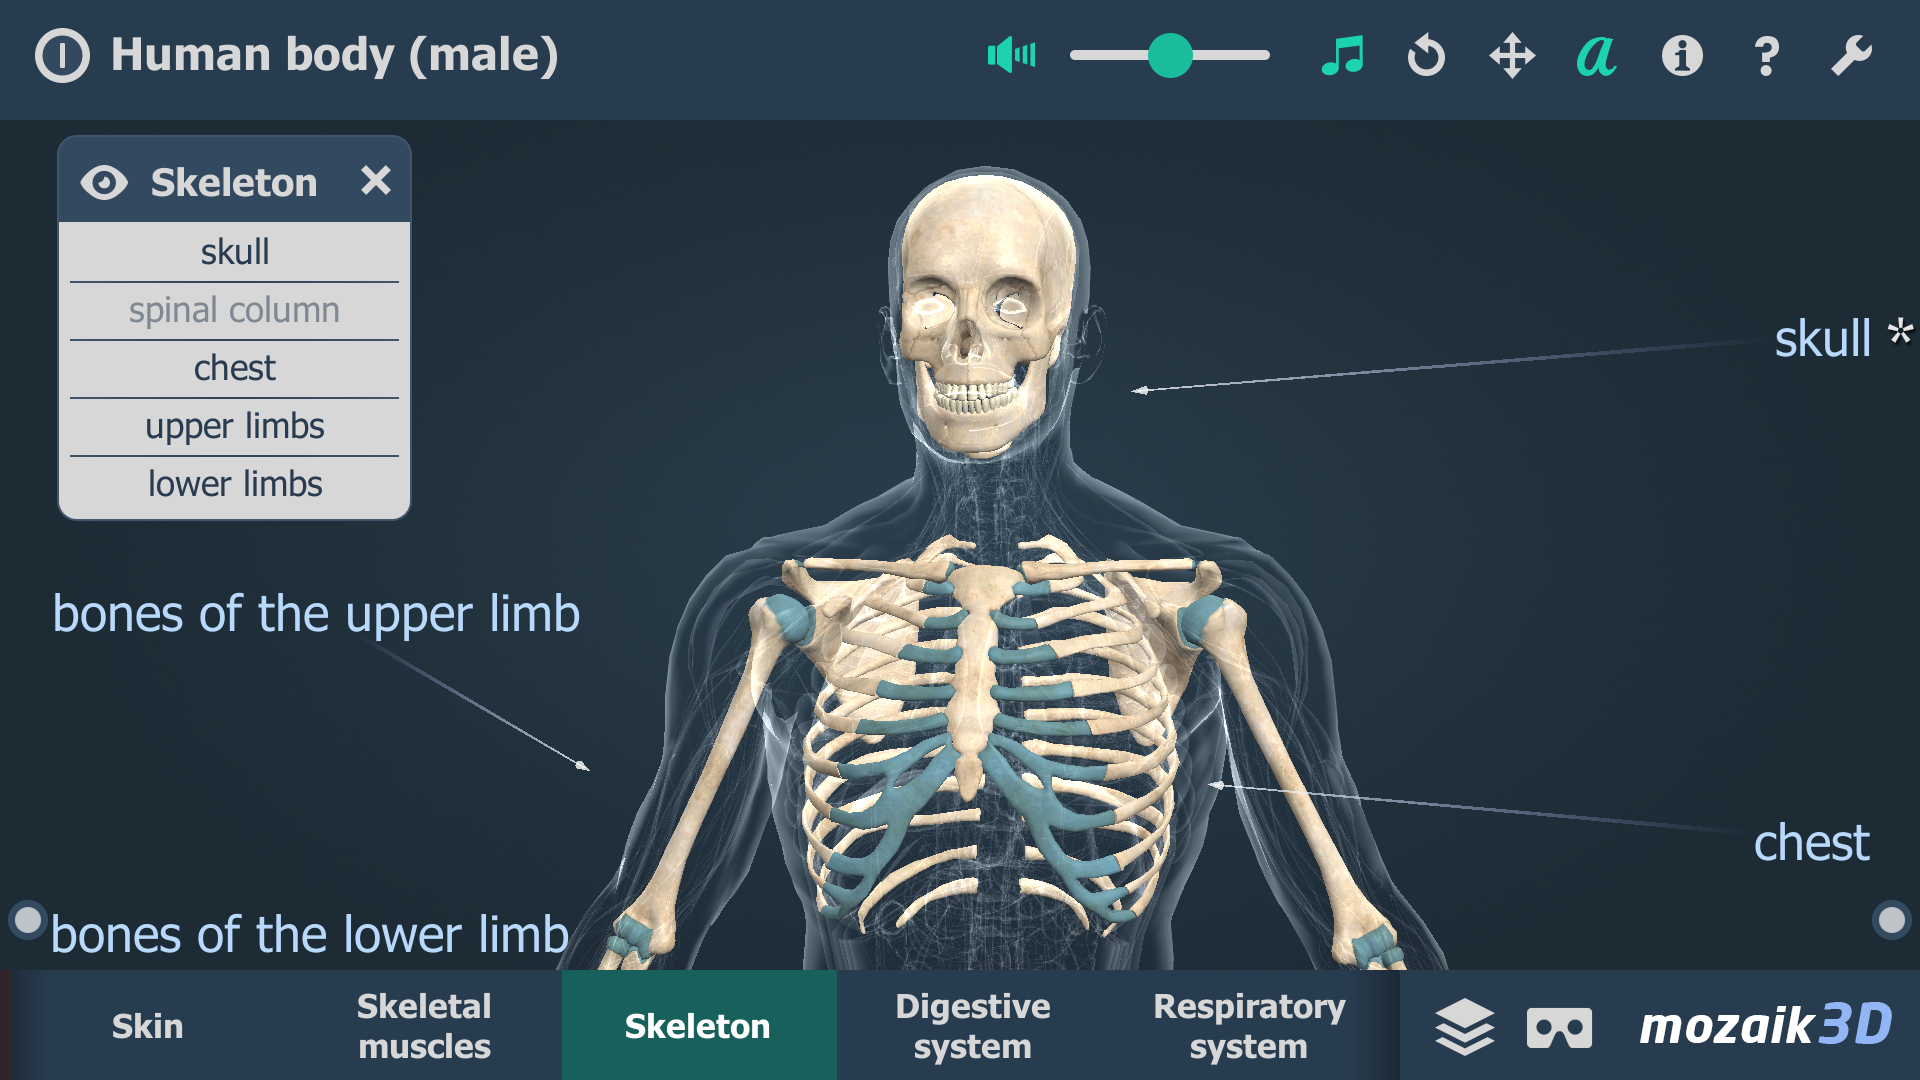 Human body (male) 3D scene APK 1.30 for Android – Download Human body (male)  3D scene XAPK (APK Bundle) Latest Version from APKFab.com